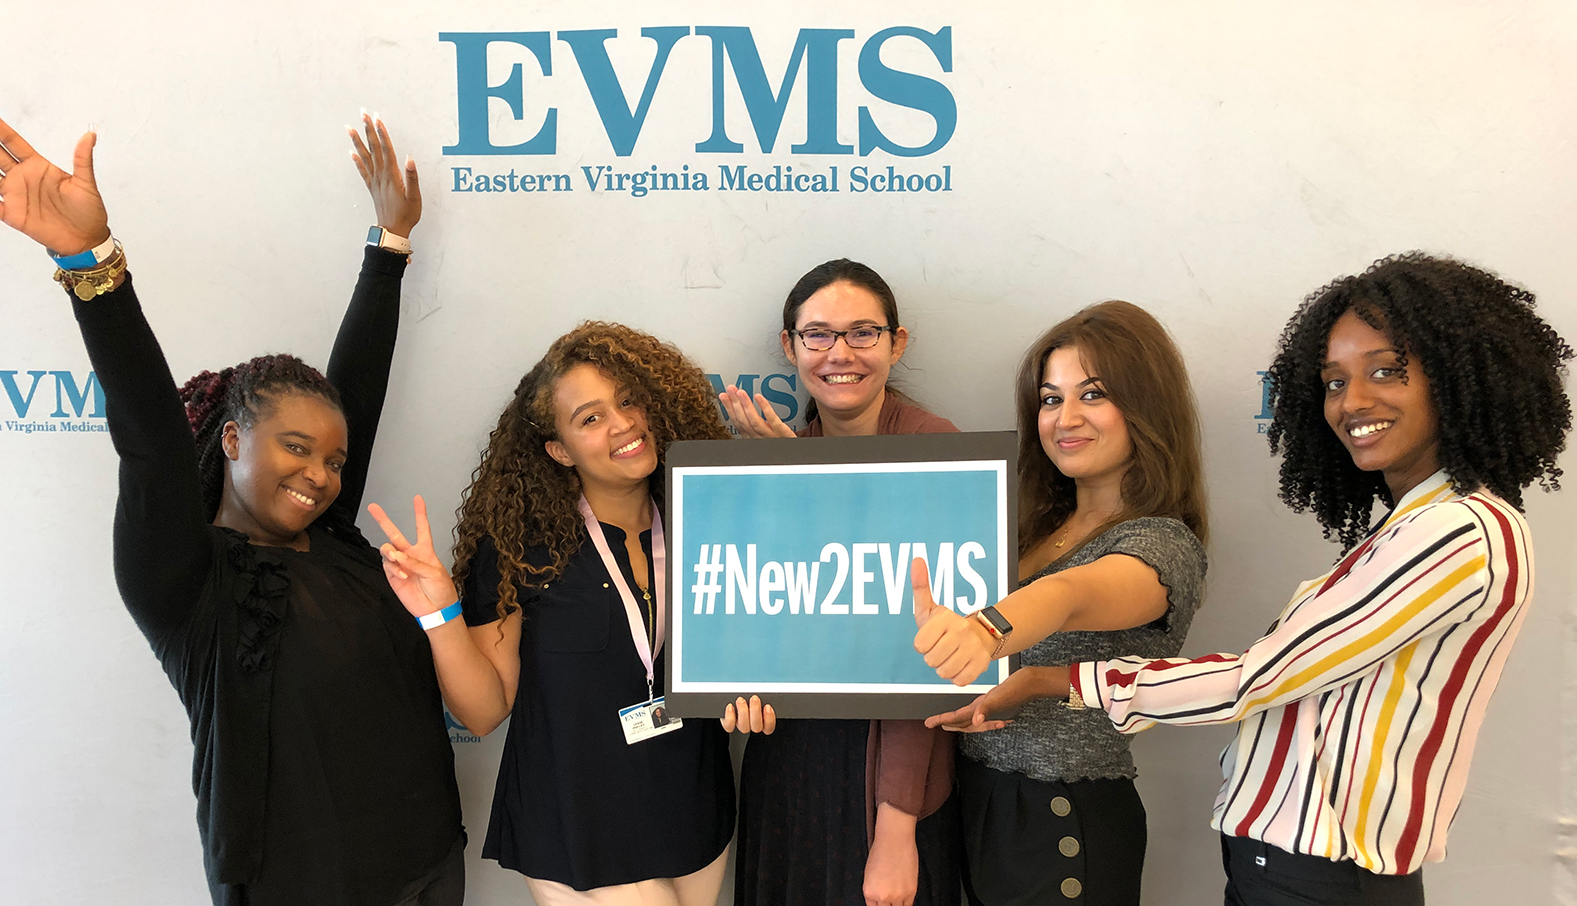 Five young women holding a sign with social media hashtag NewToEVMS